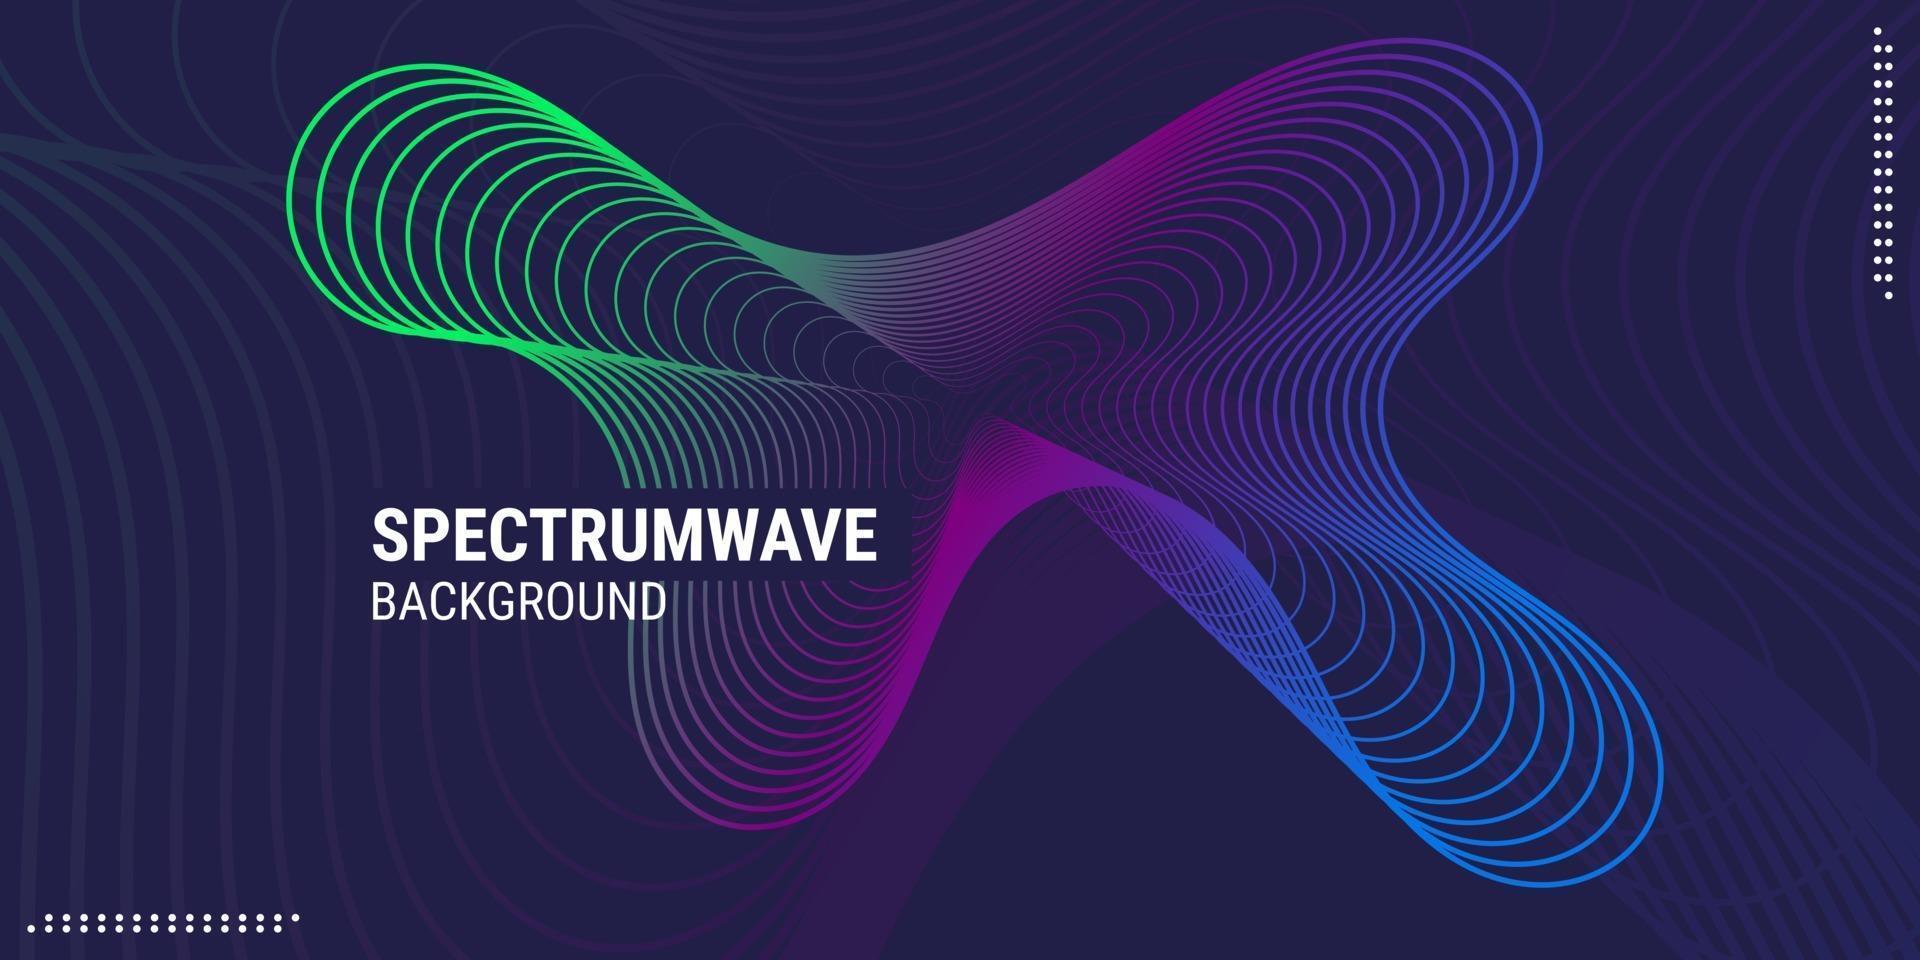 Abstract background music wave design Suitable for posters flyers banners advertising websites etc Vector Illustration